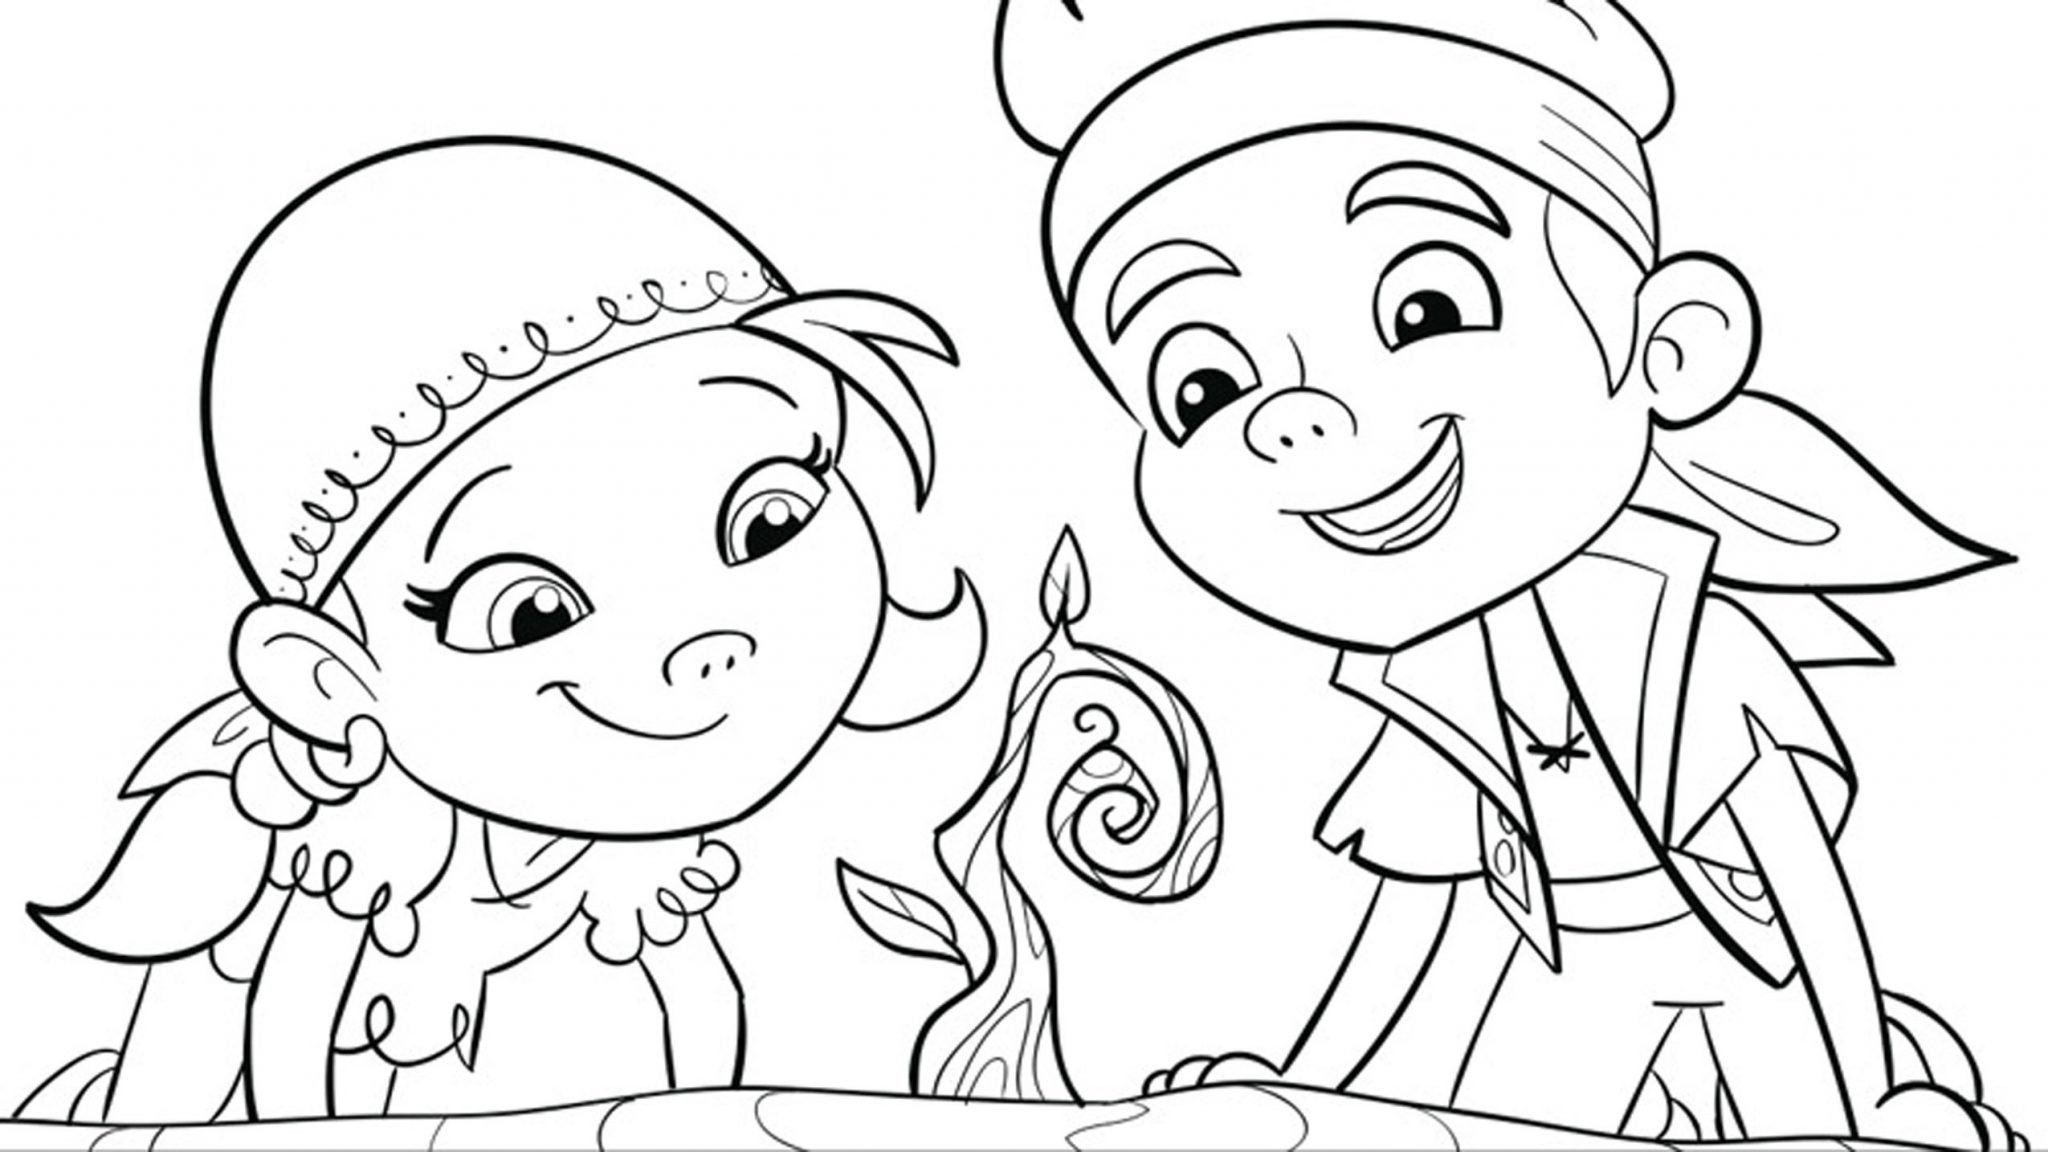 Disney Coloring Pages For Kids
 33 Free Disney Coloring Pages for Kids